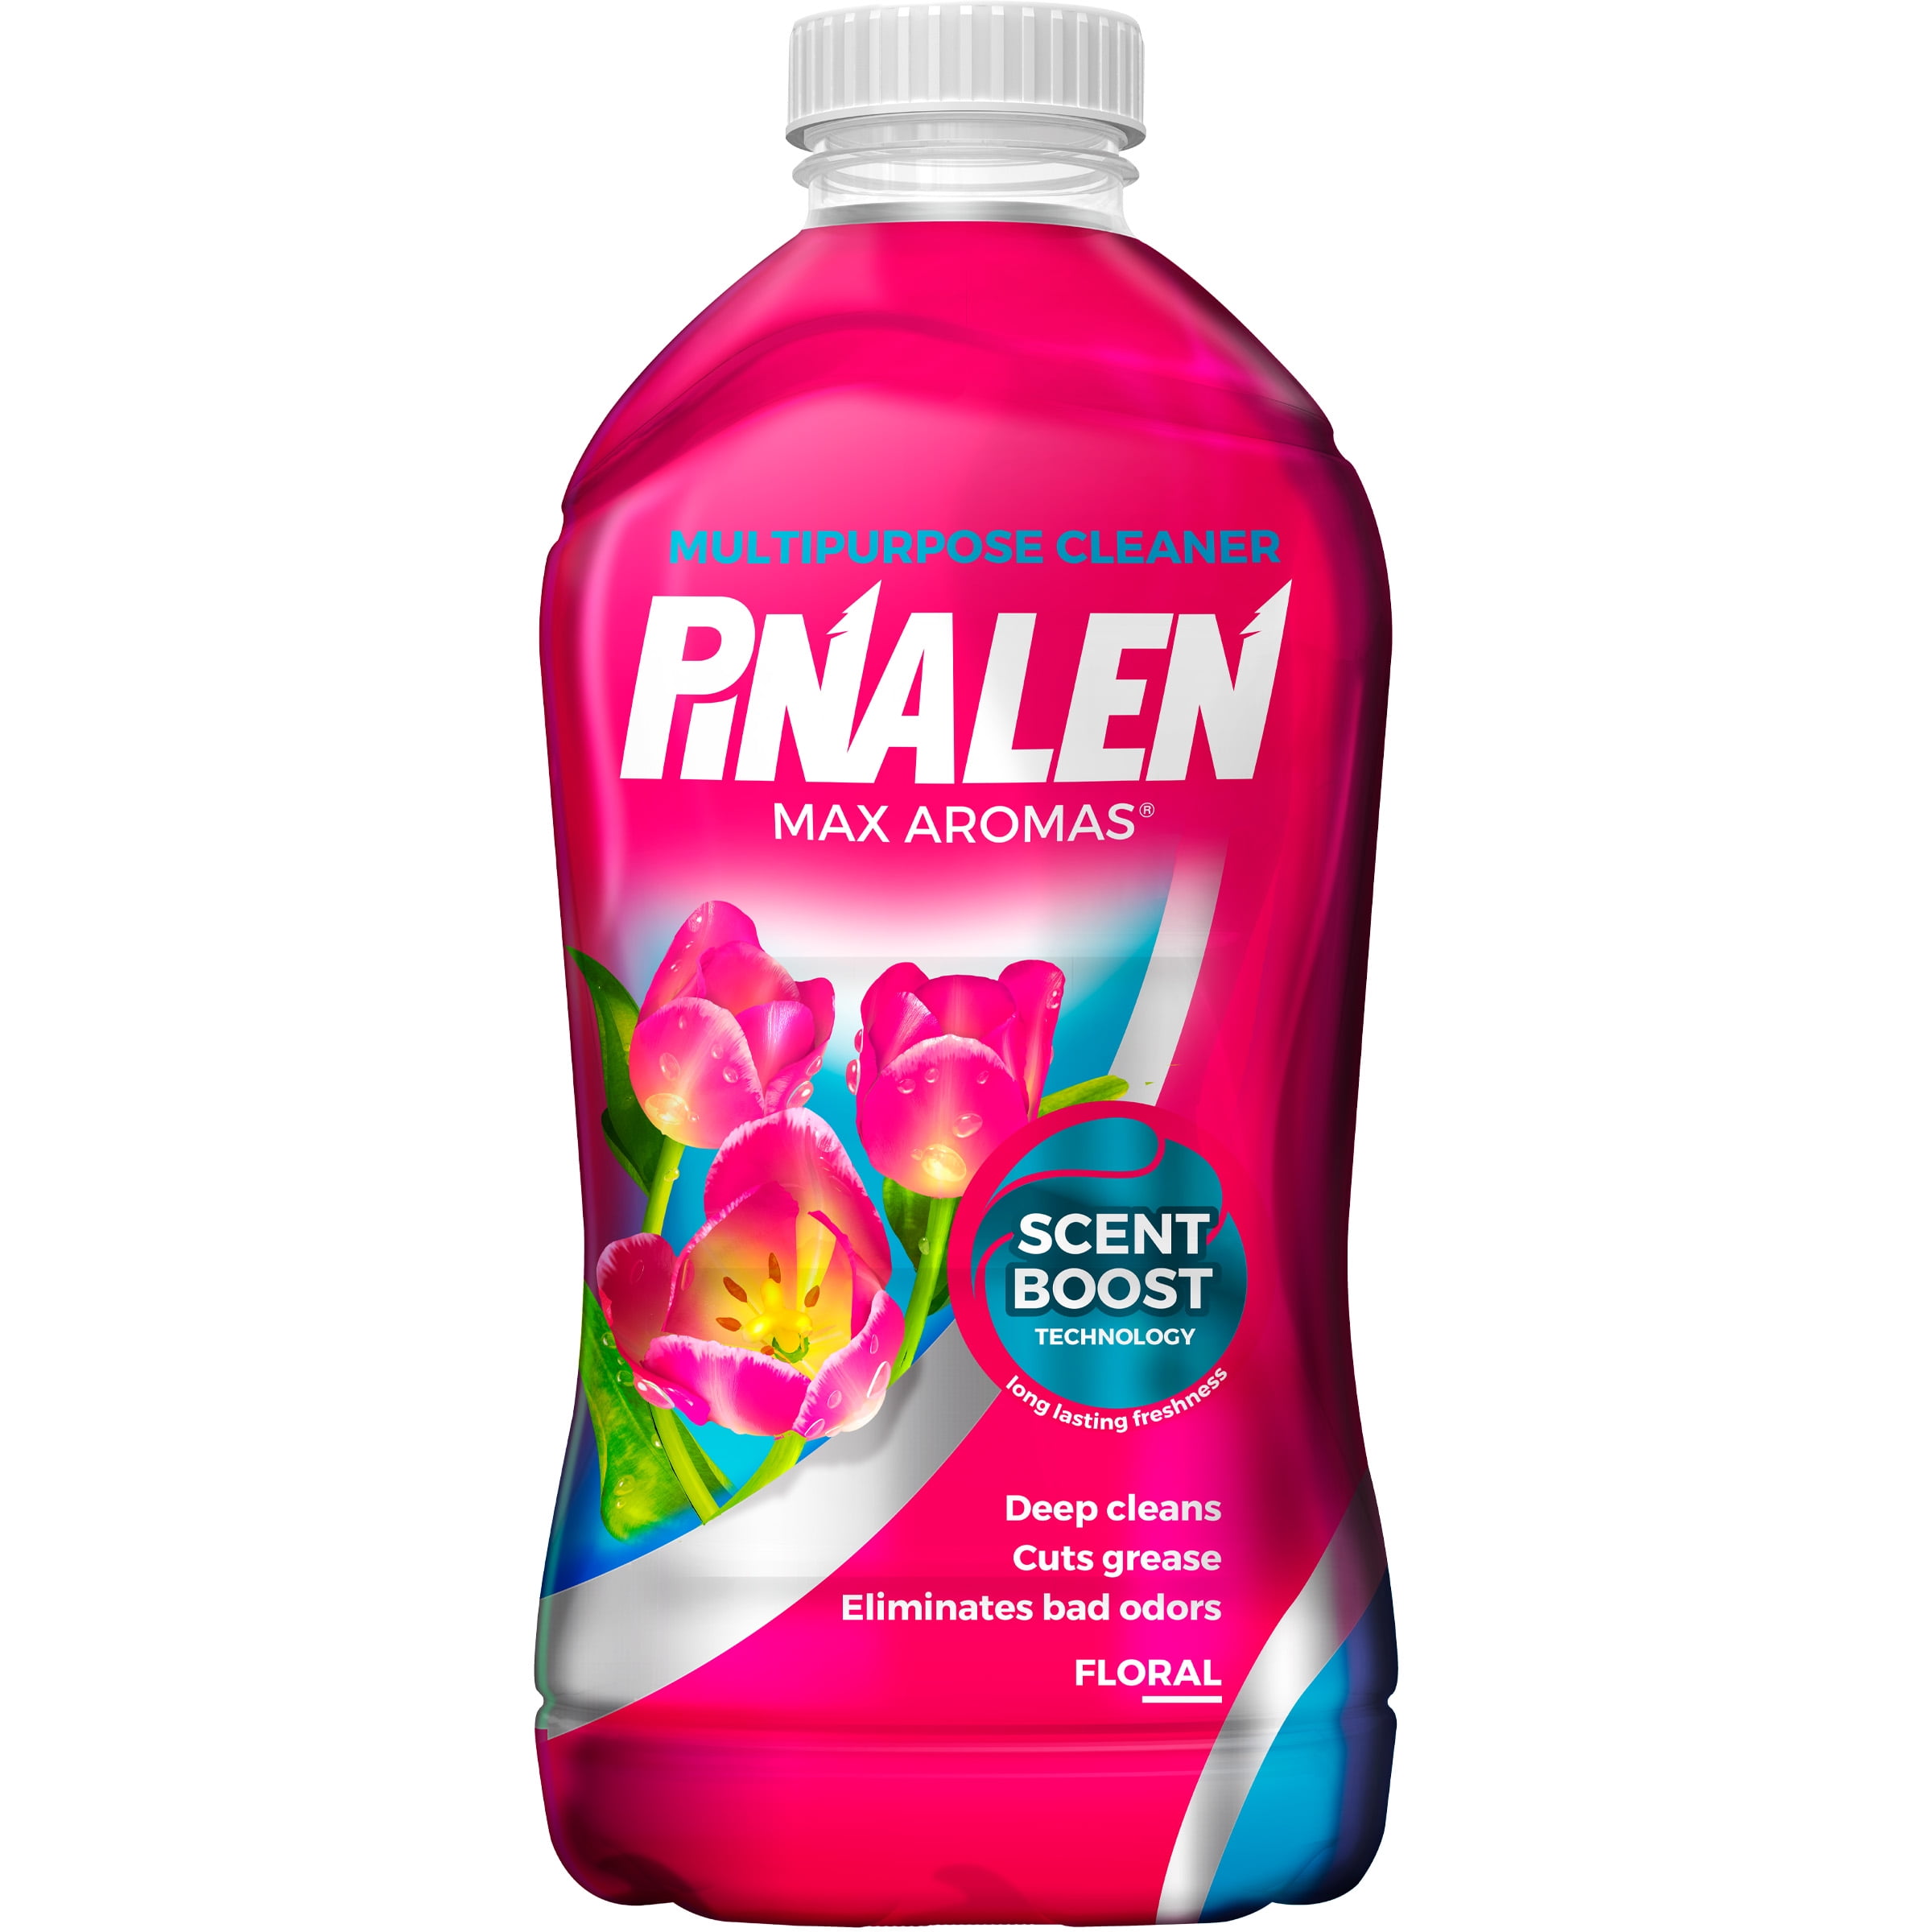 PINALEN Max Aromas® Multipurpose Cleaner, Floral Delight, 56 fl.oz. with Scent Boost Technology